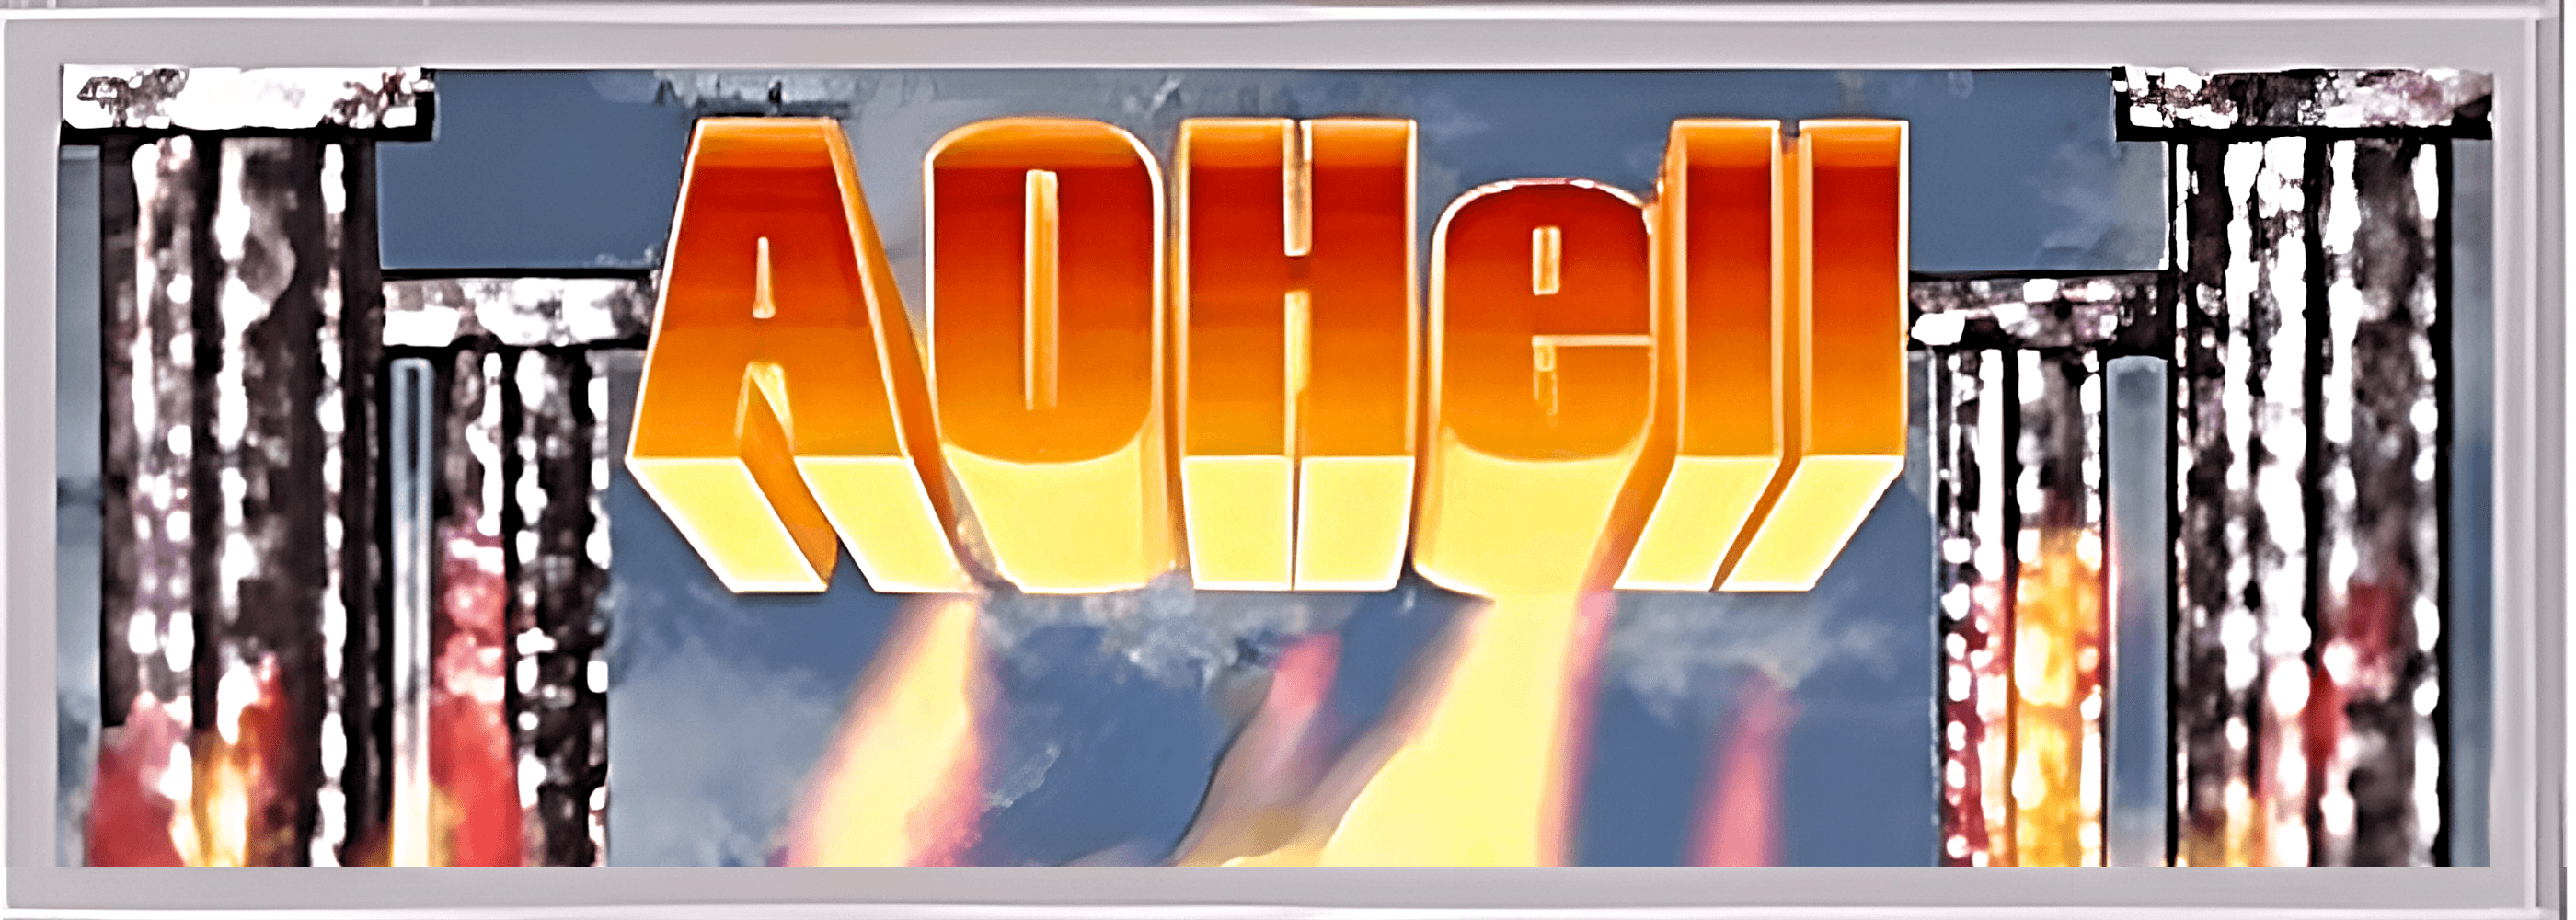 AOHELL banner